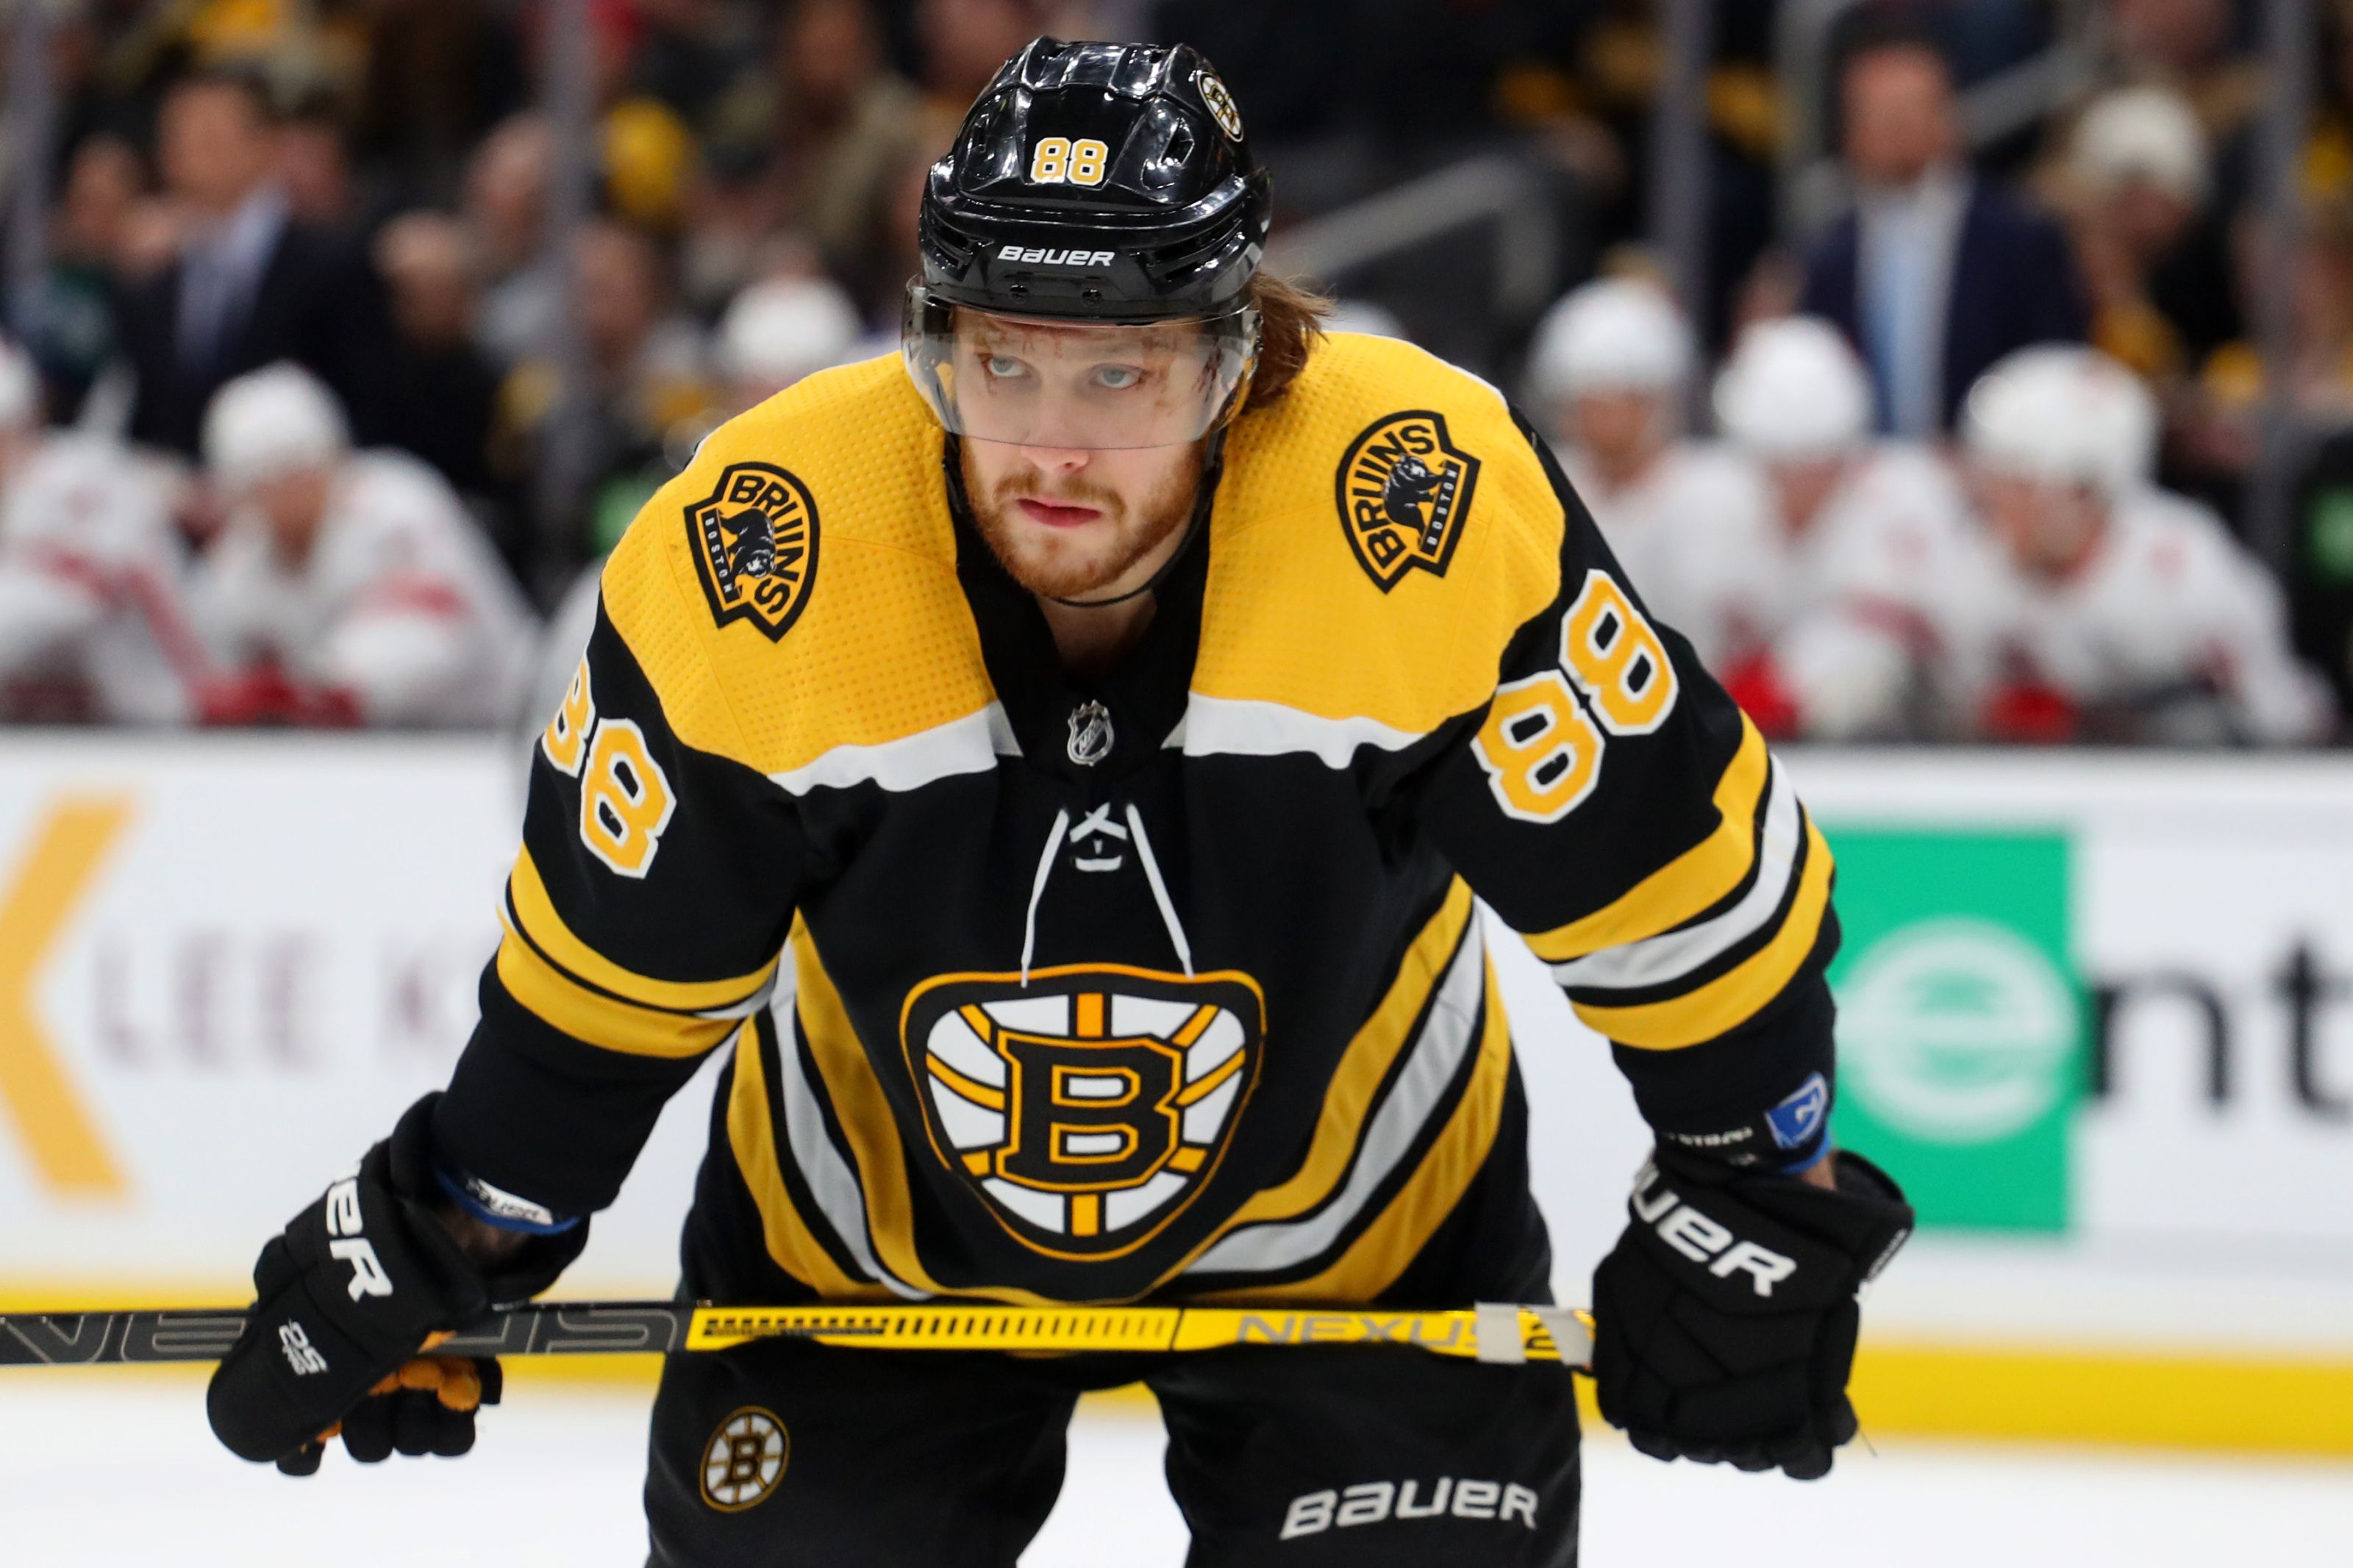 Why David Pastrnak should win the Hart Trophy this season.